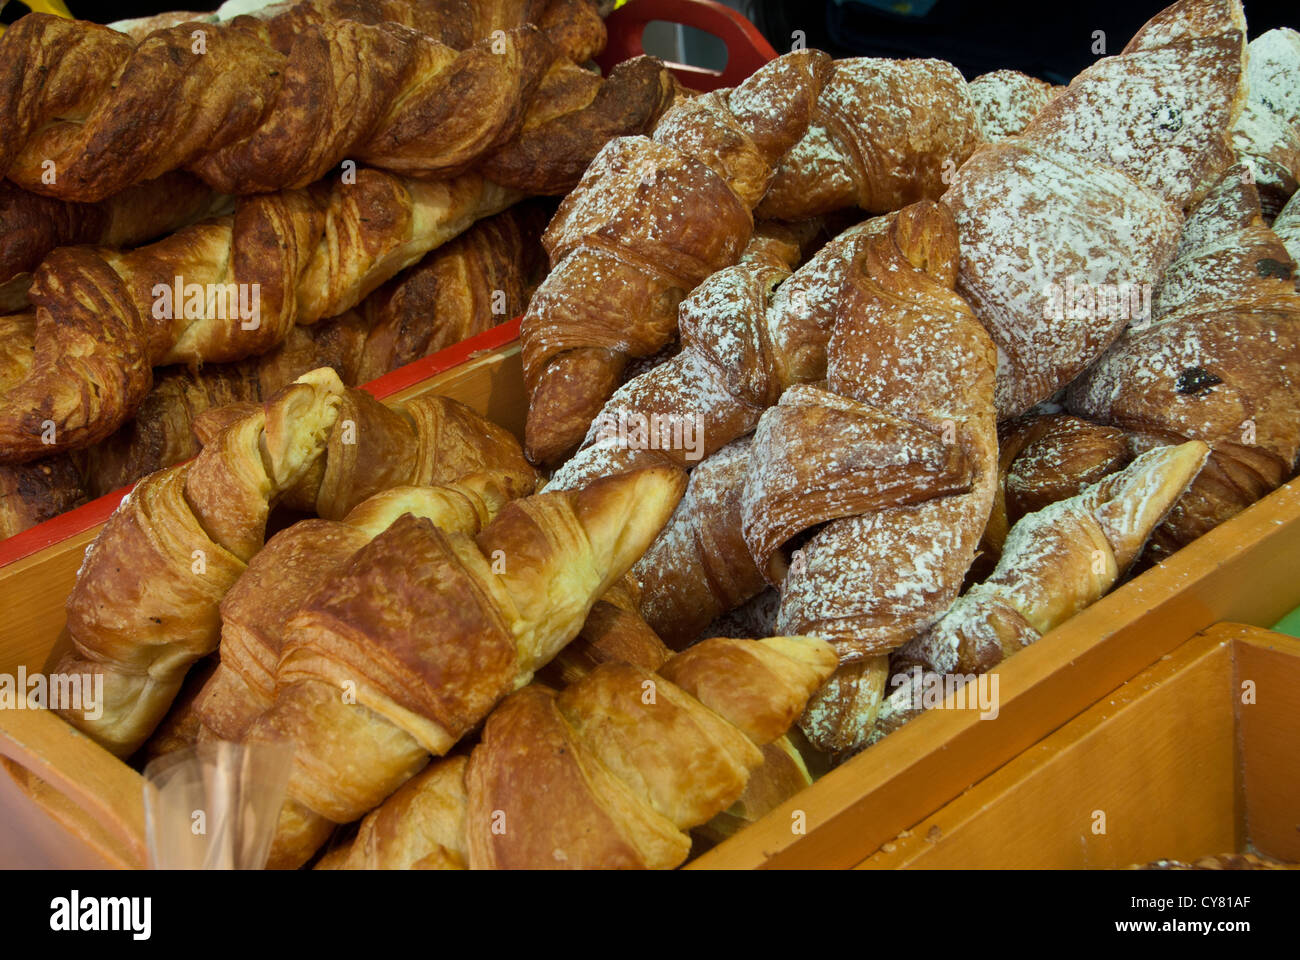 Croissants on display in a wooden box at a bakers market stall Stock Photo